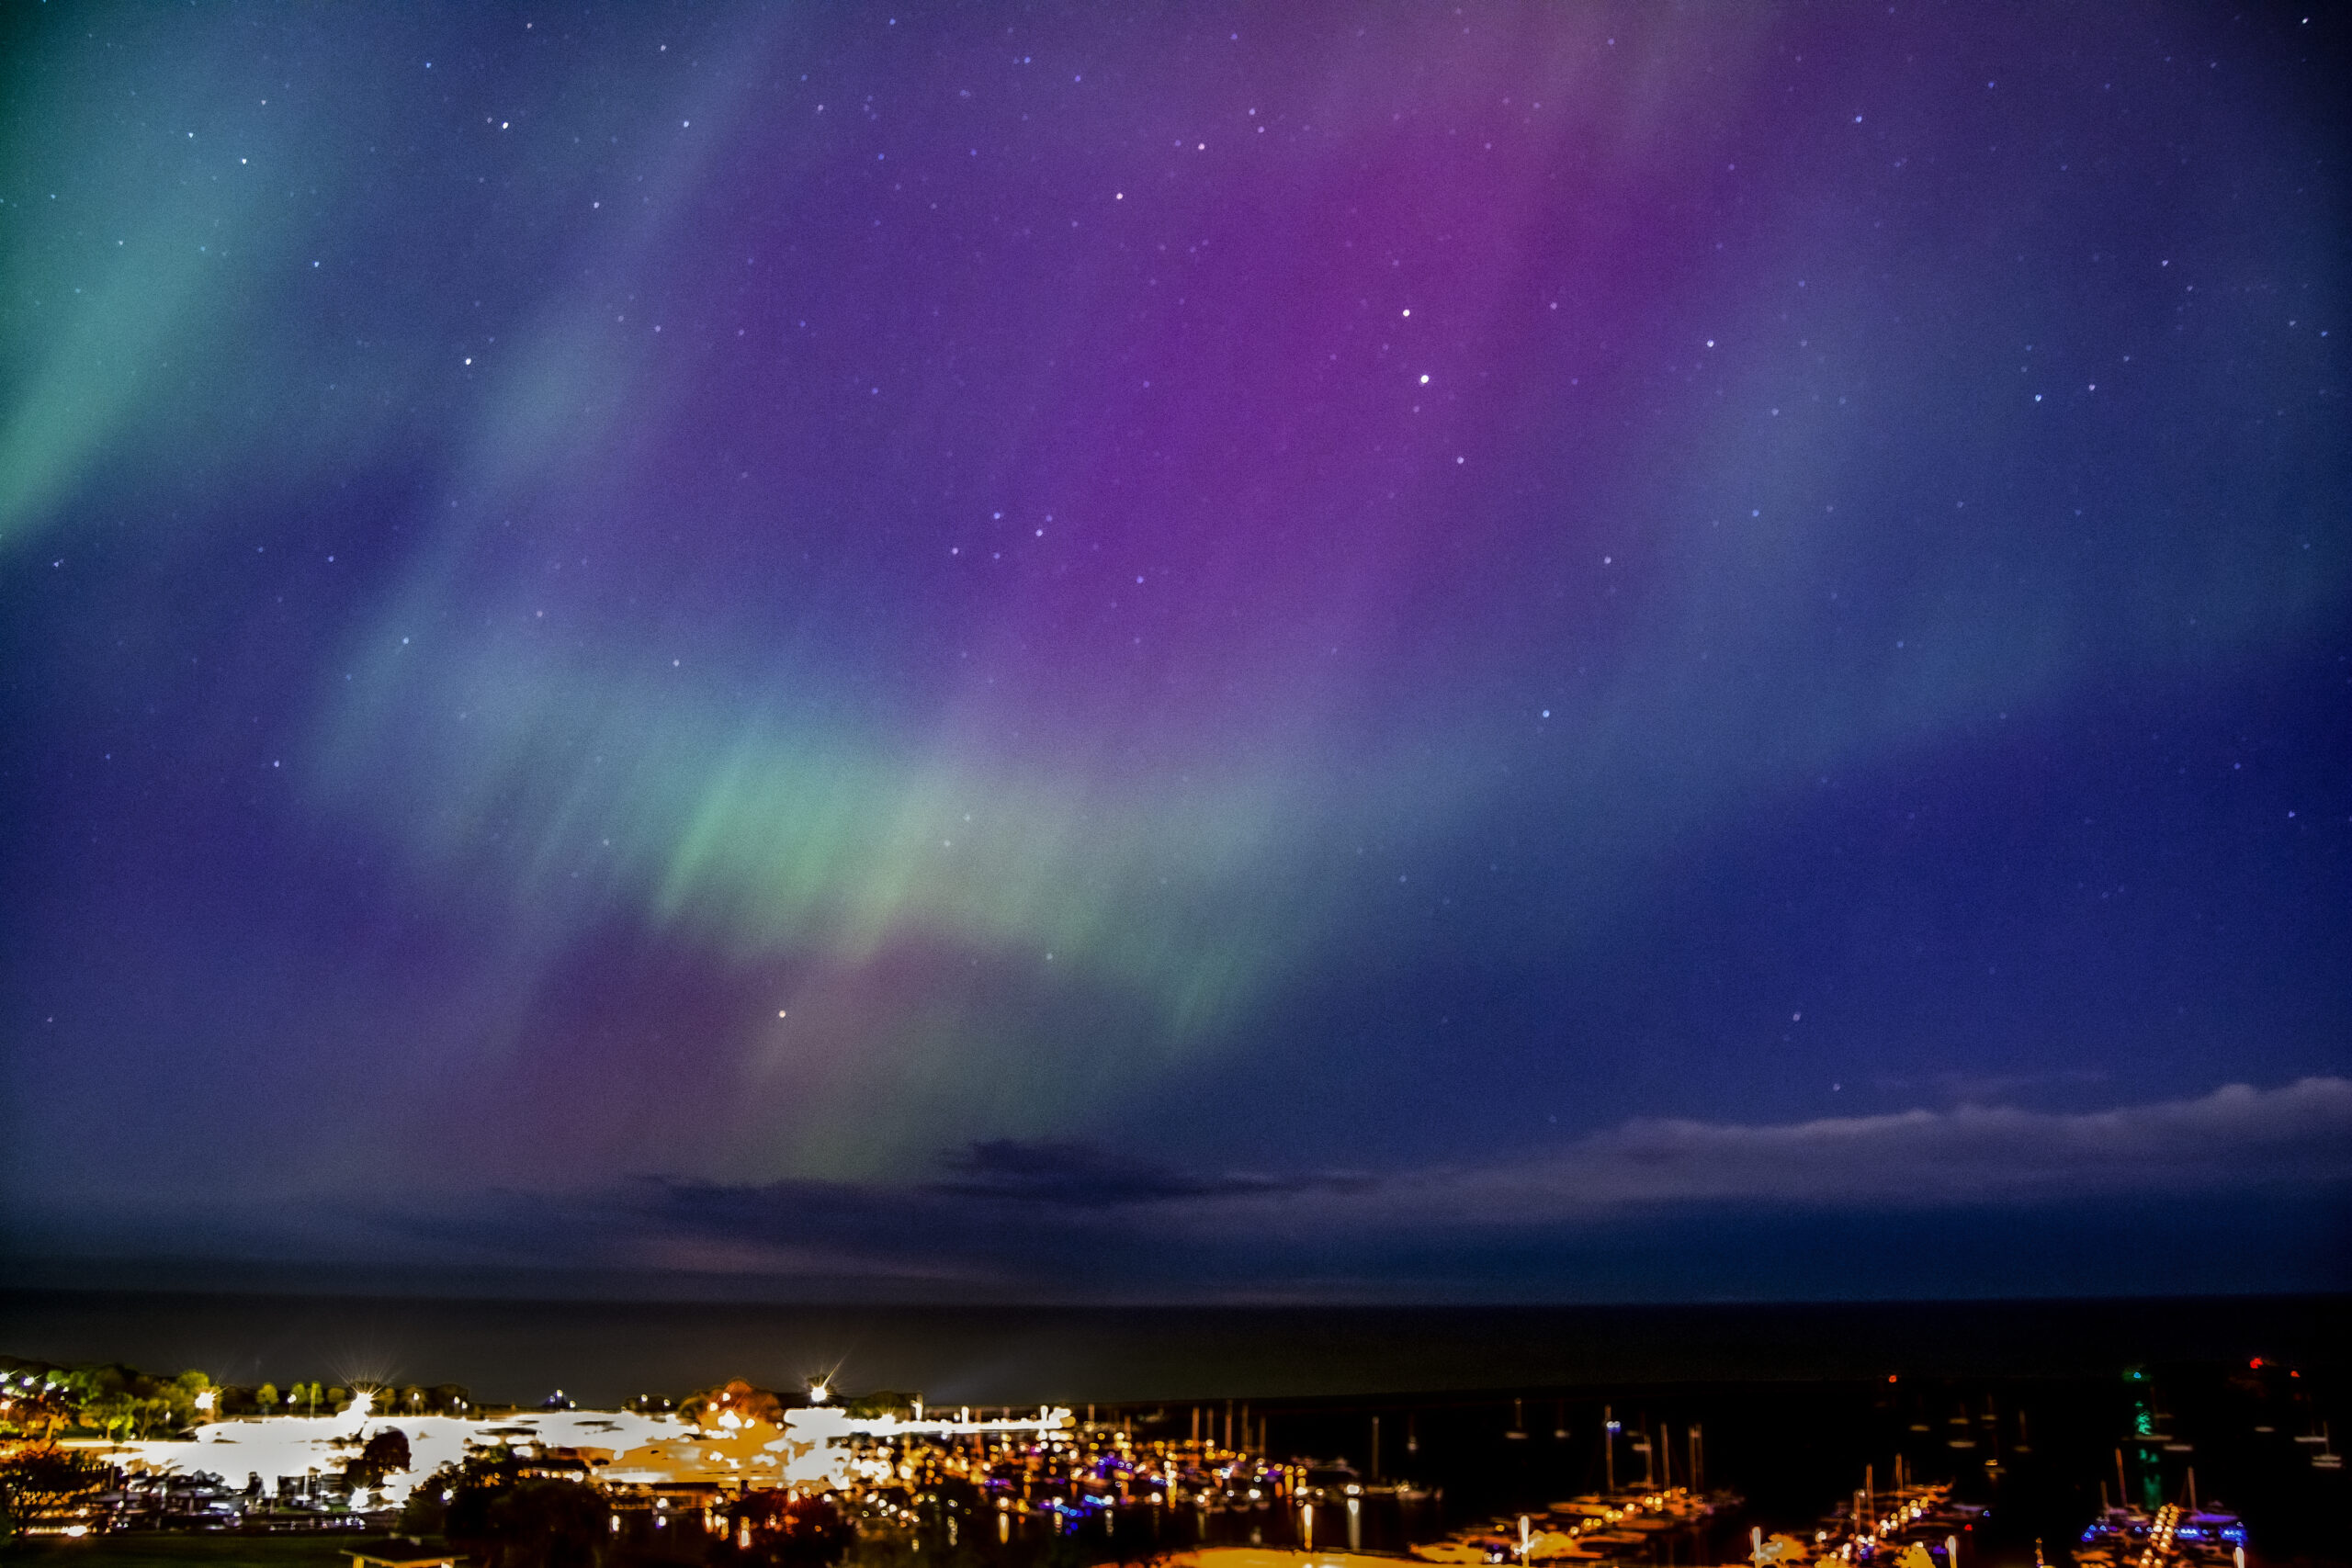 Missed the Aurora Borealis? Don’t worry, it’ll come again soon.